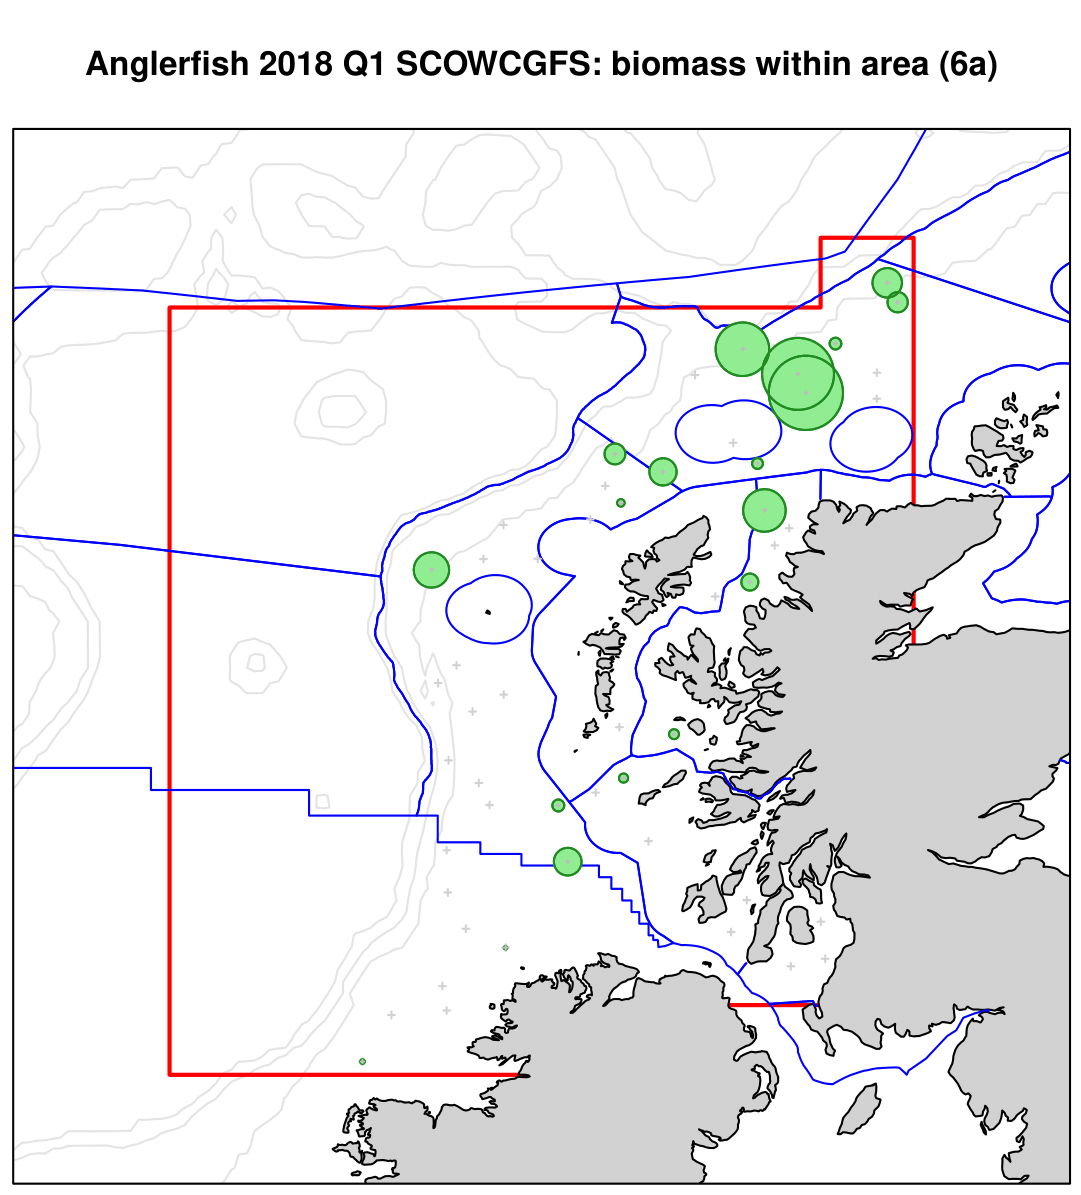 Monkfish 2018 Q1 SCOWCGFS: biomass within area (6a)